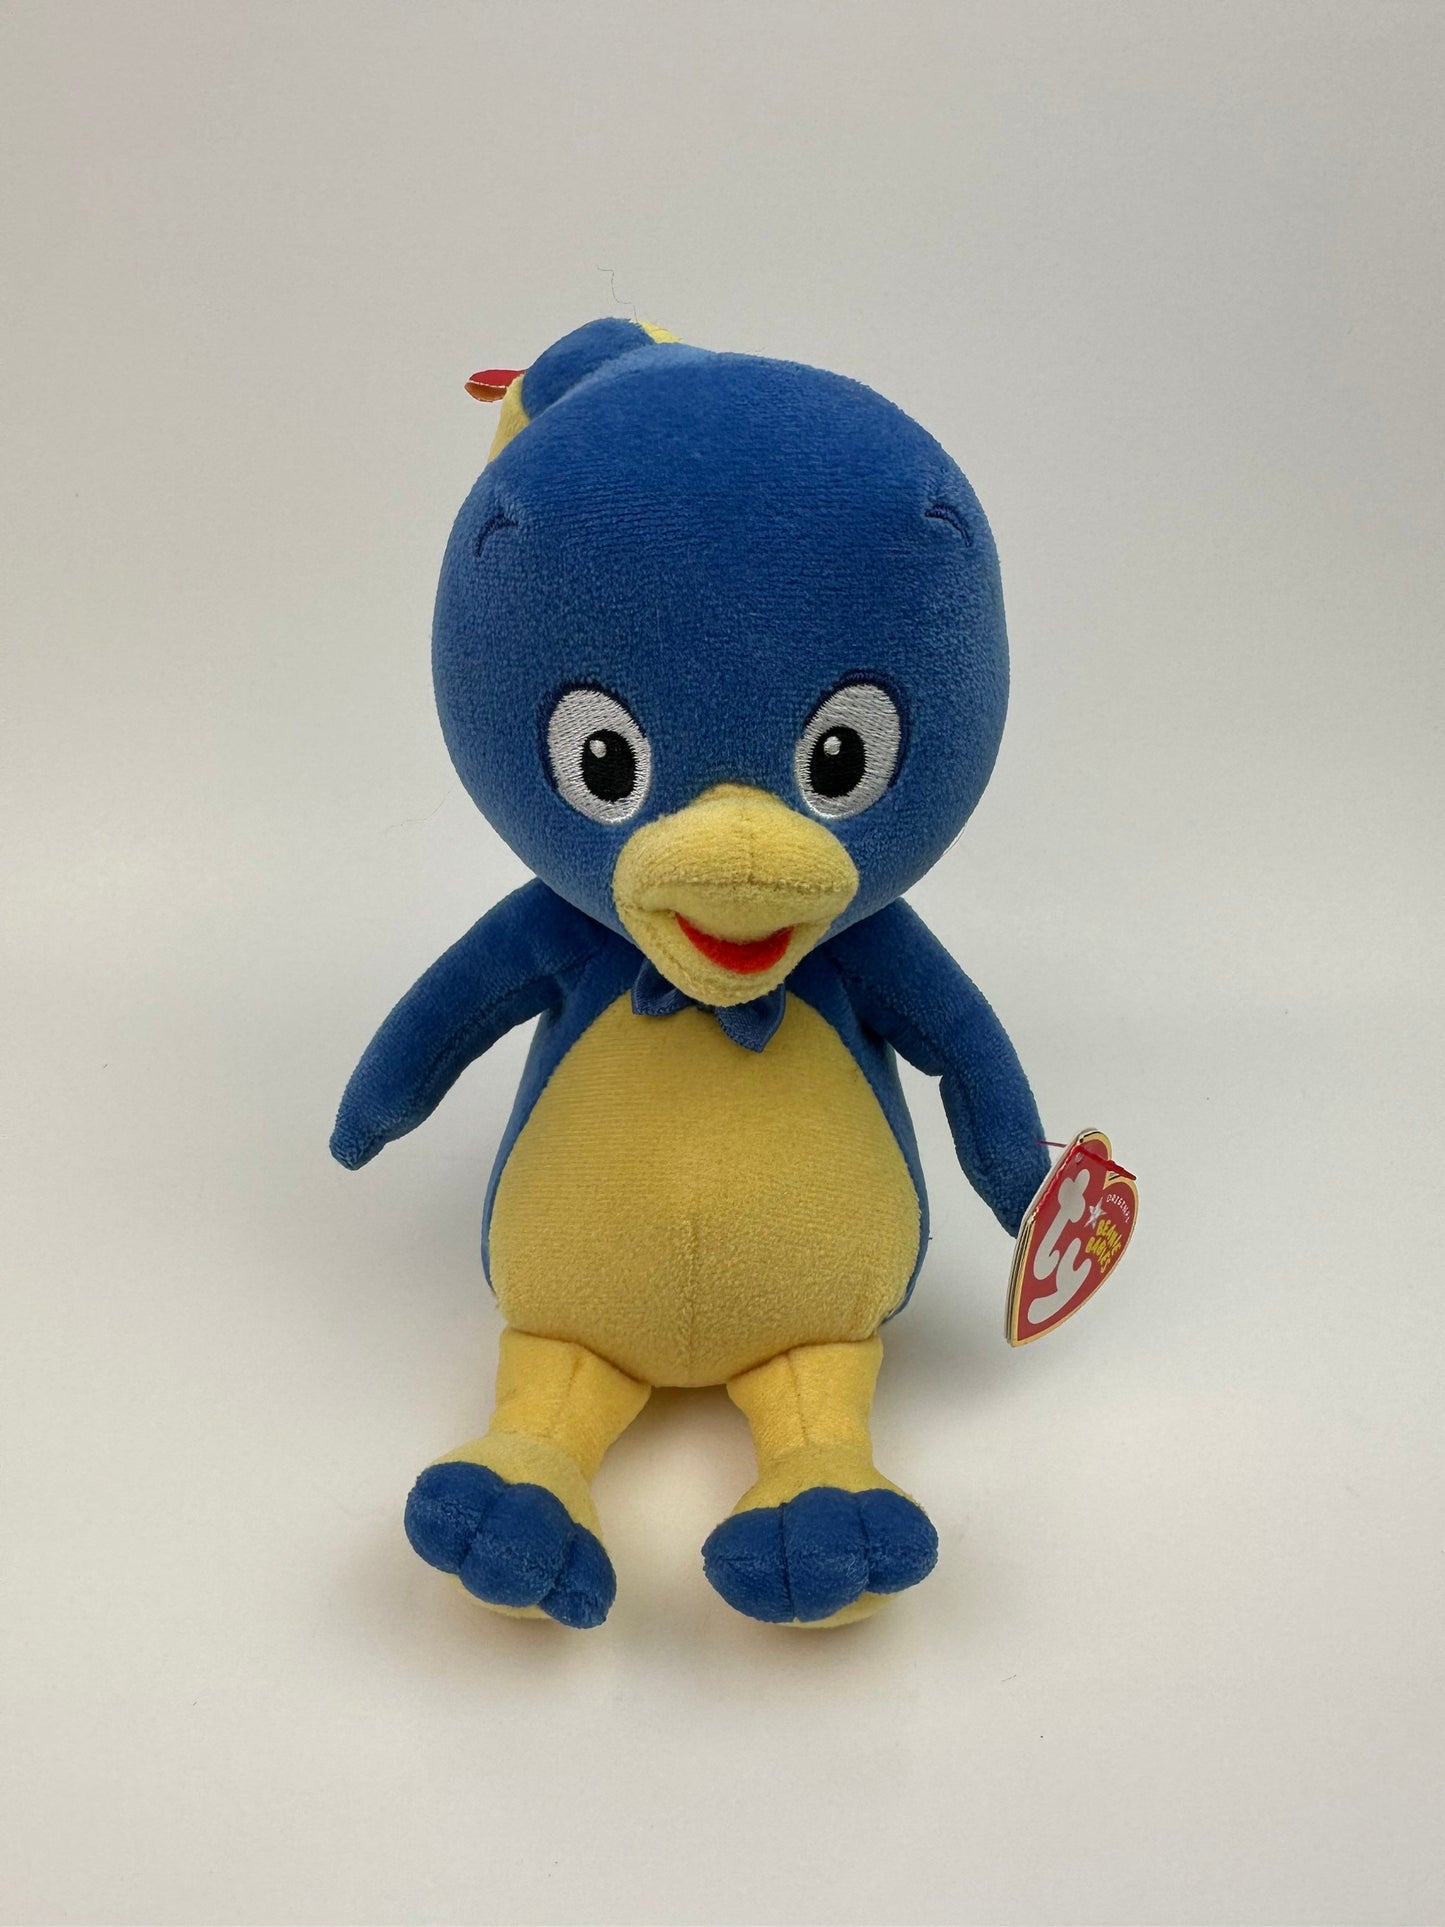 Ty Beanie Baby “Pablo” the Penguin - The Backyardigans (6 inch)